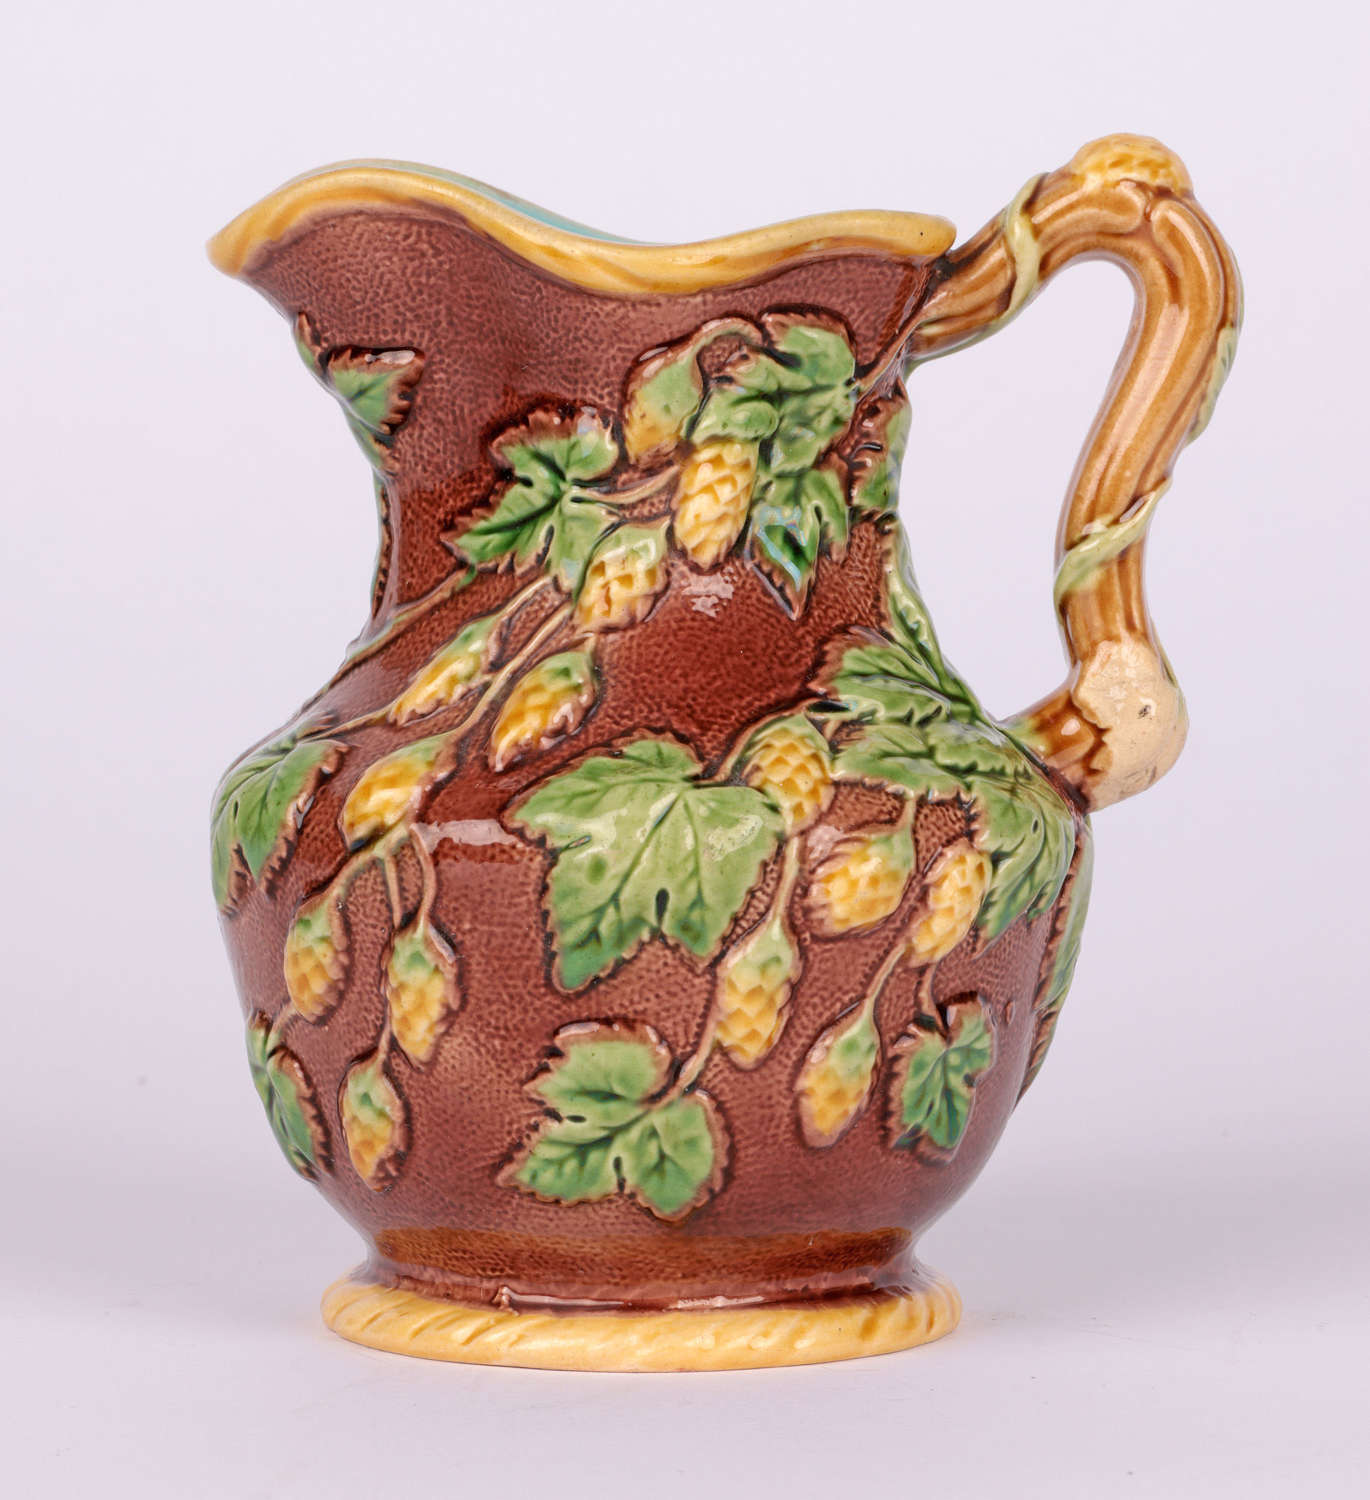 Minton Majolica Pottery Ale Jug Decorated with Hops